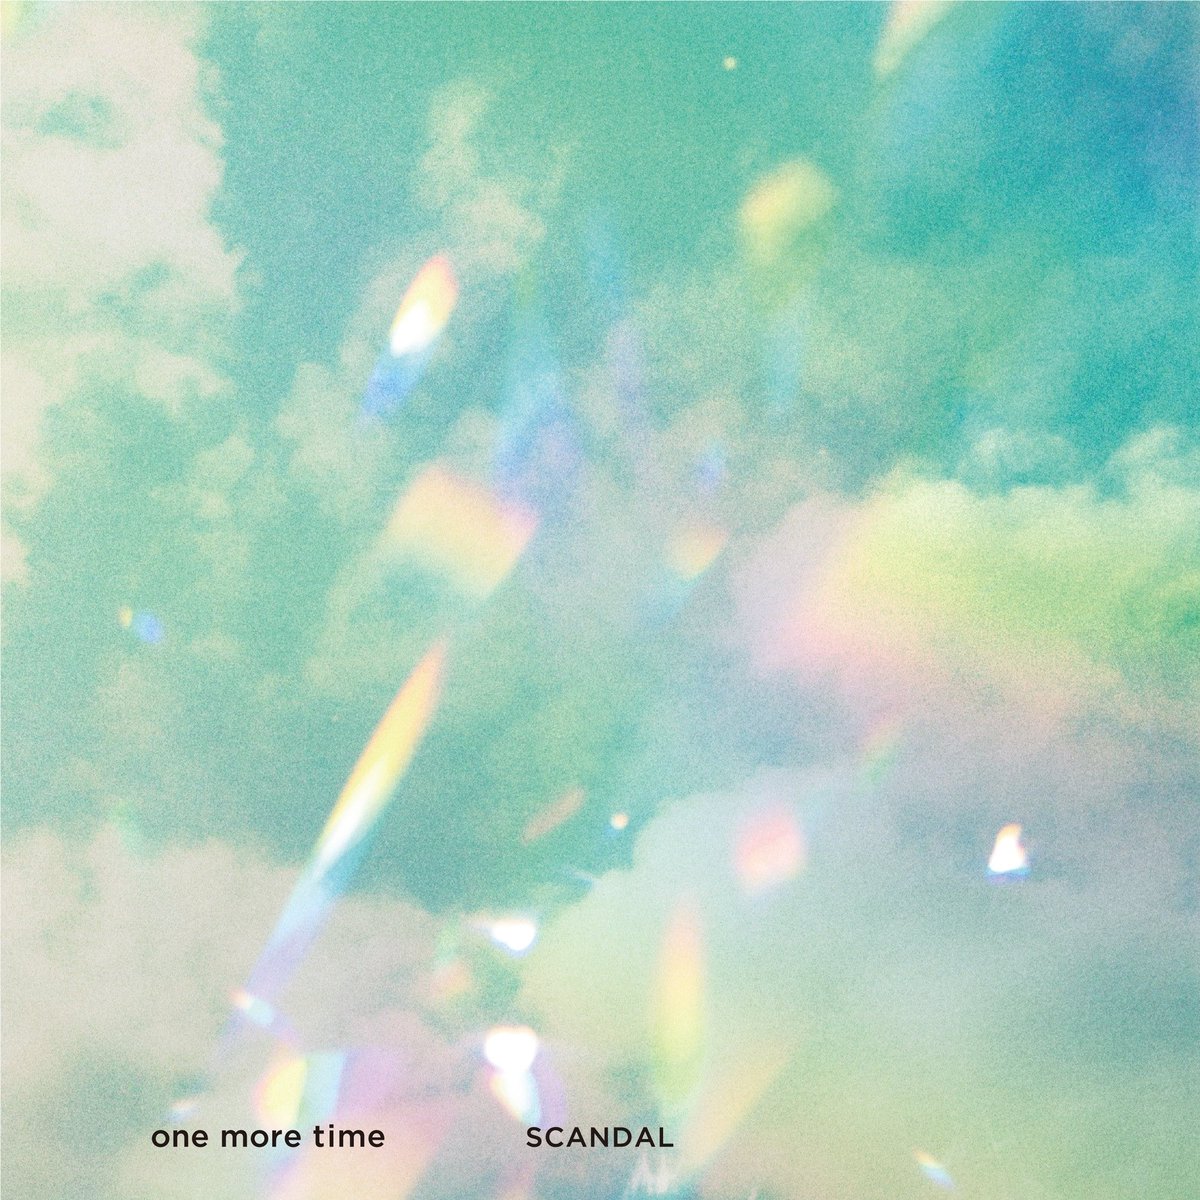 『SCANDAL - one more time』収録の『one more time』ジャケット